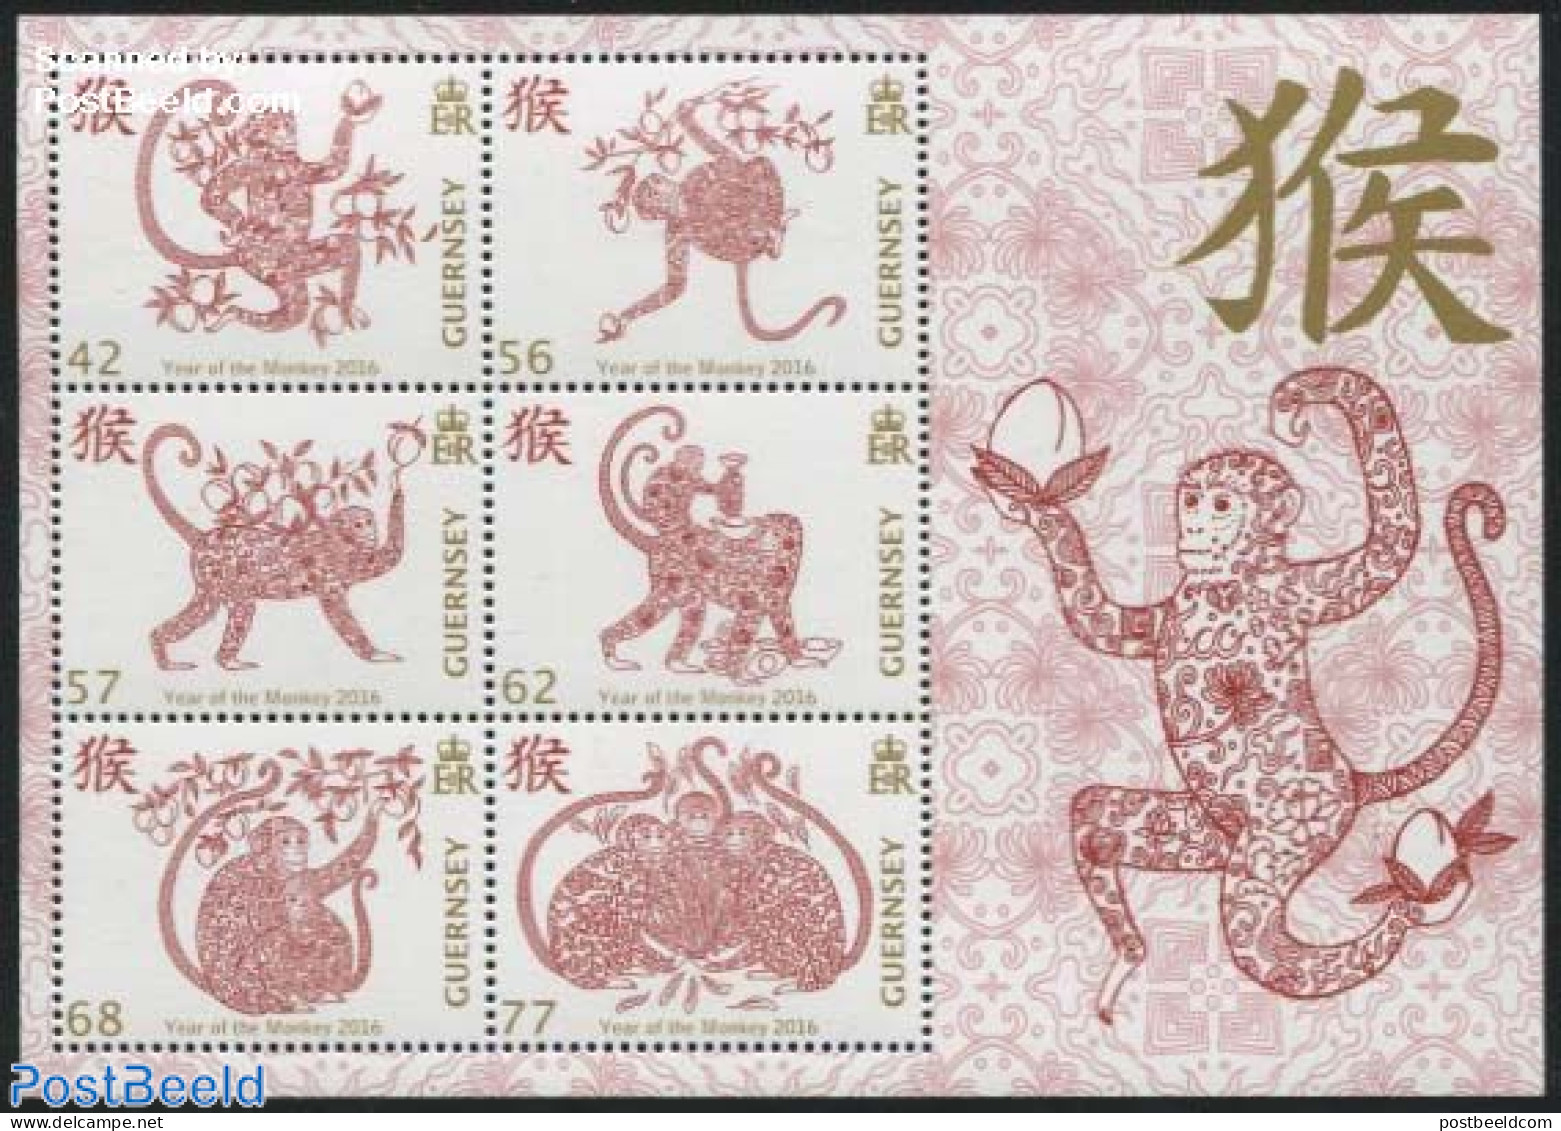 Guernsey 2016 Year Of The Monkey S/s, Mint NH, Nature - Various - Monkeys - New Year - New Year